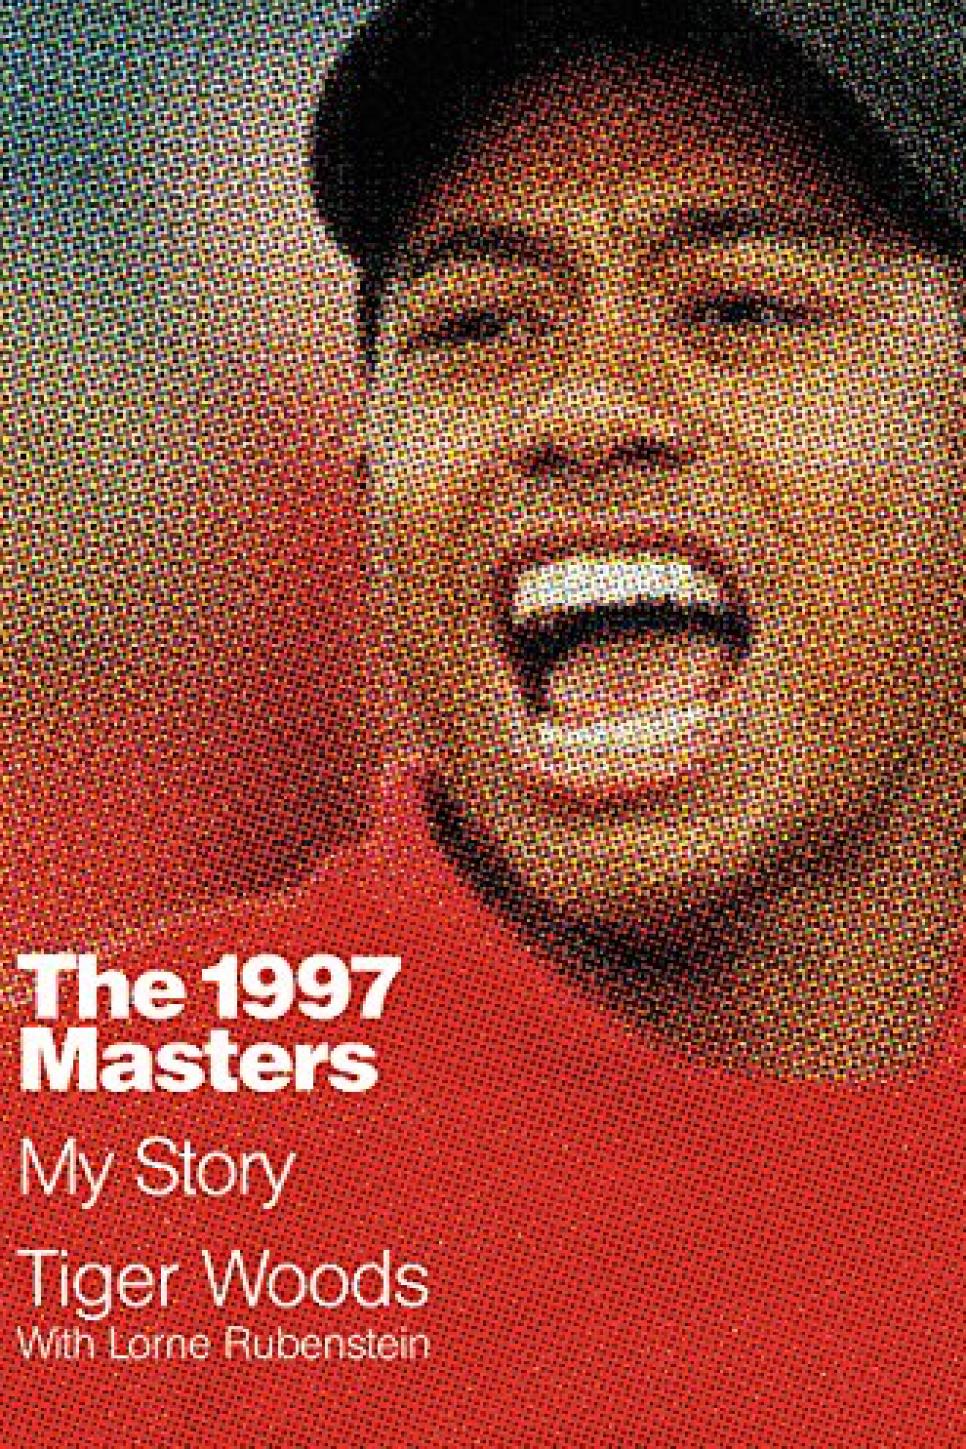 Tiger-Woods-book-cover.jpg